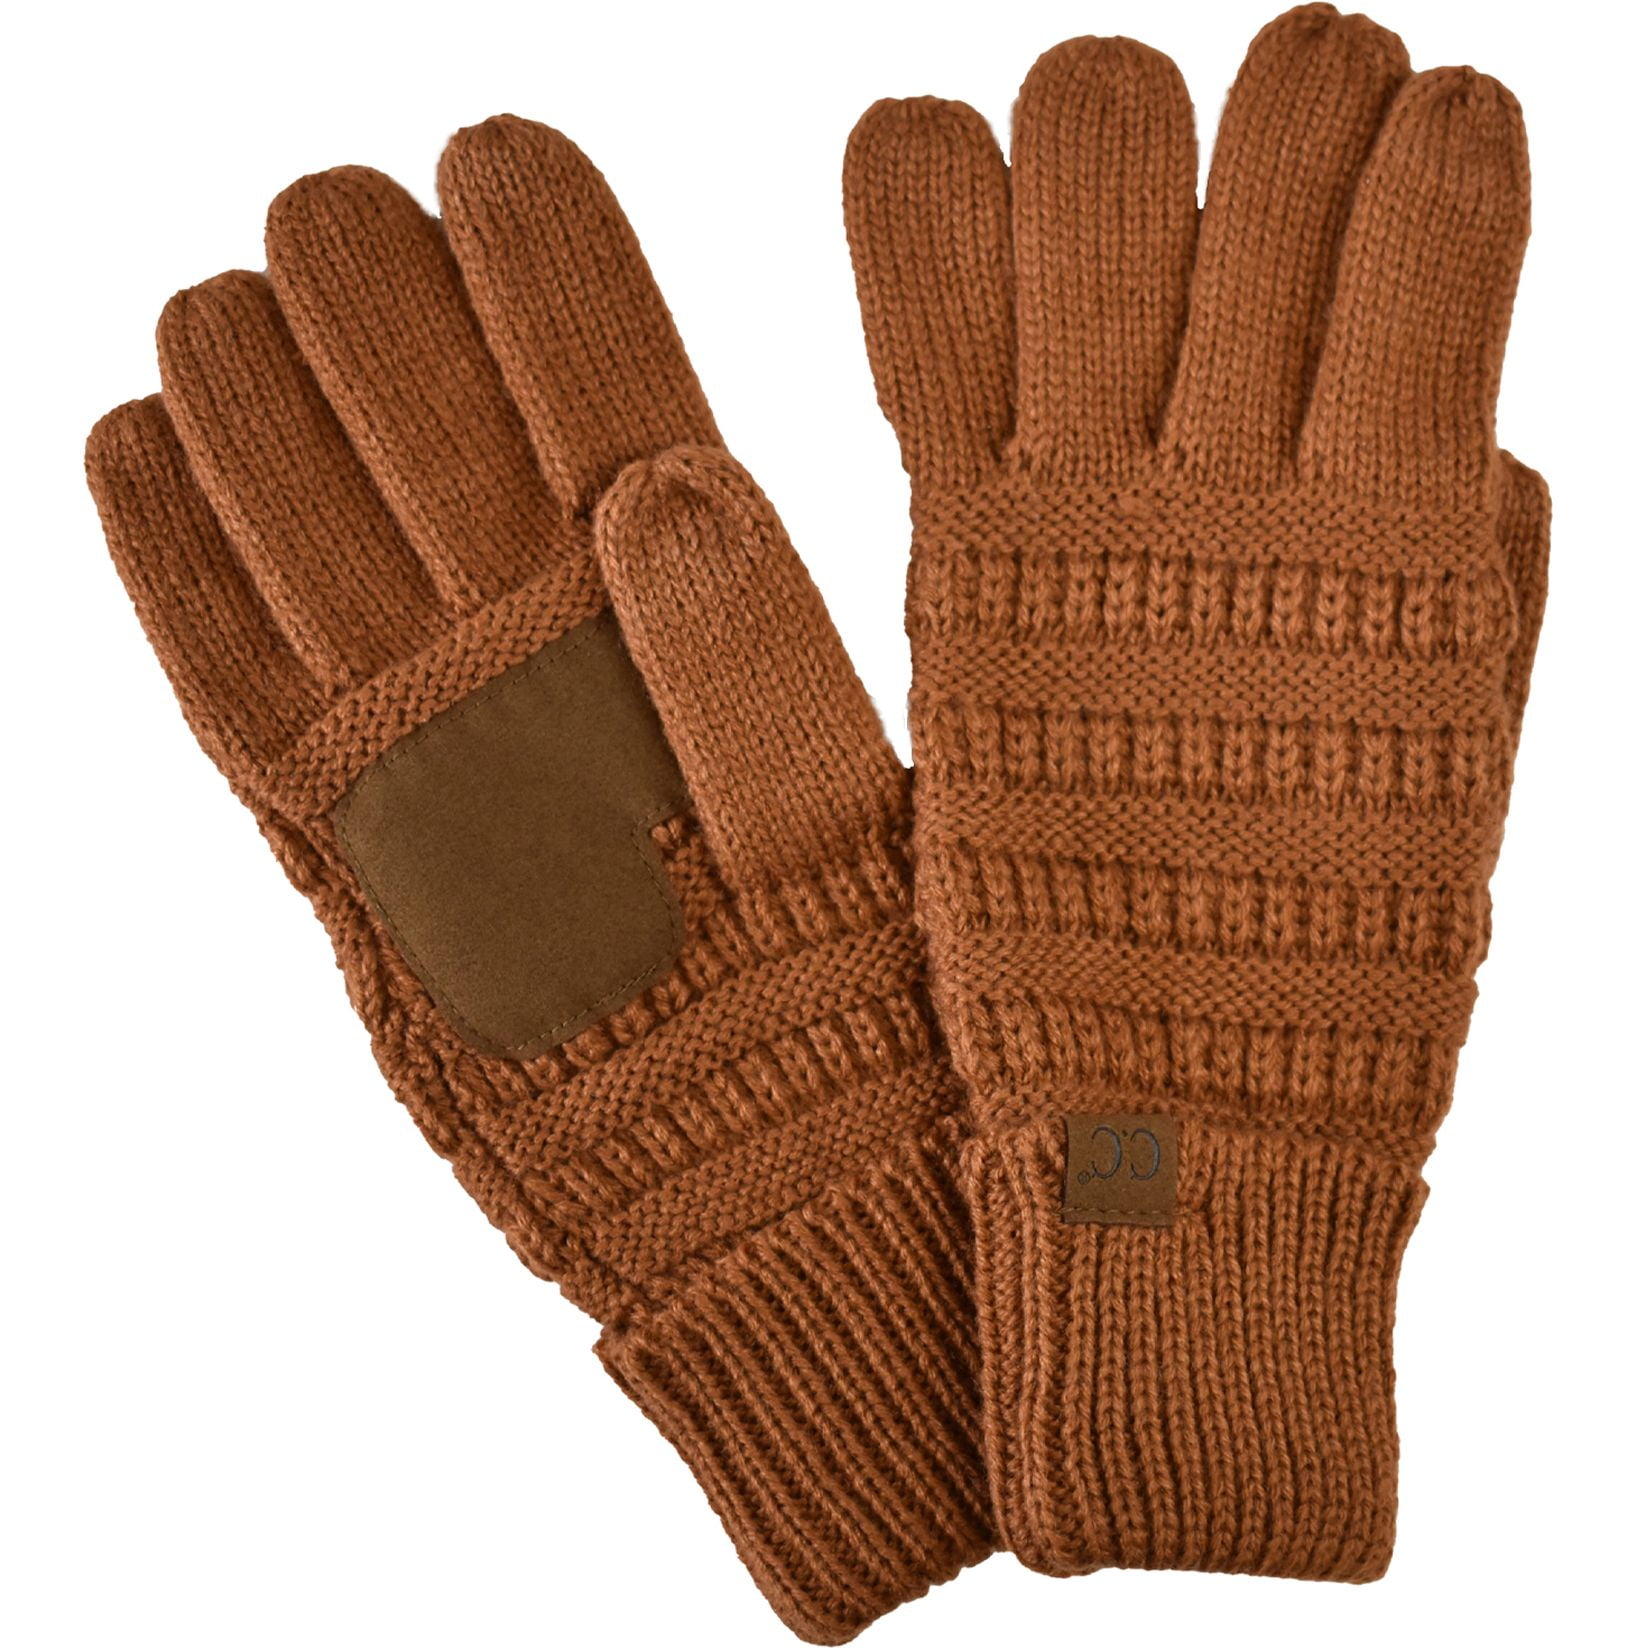 Men's Broner Ragg Wool Glove Mitts with Thinsulate Fits Most #13-559 One Size 